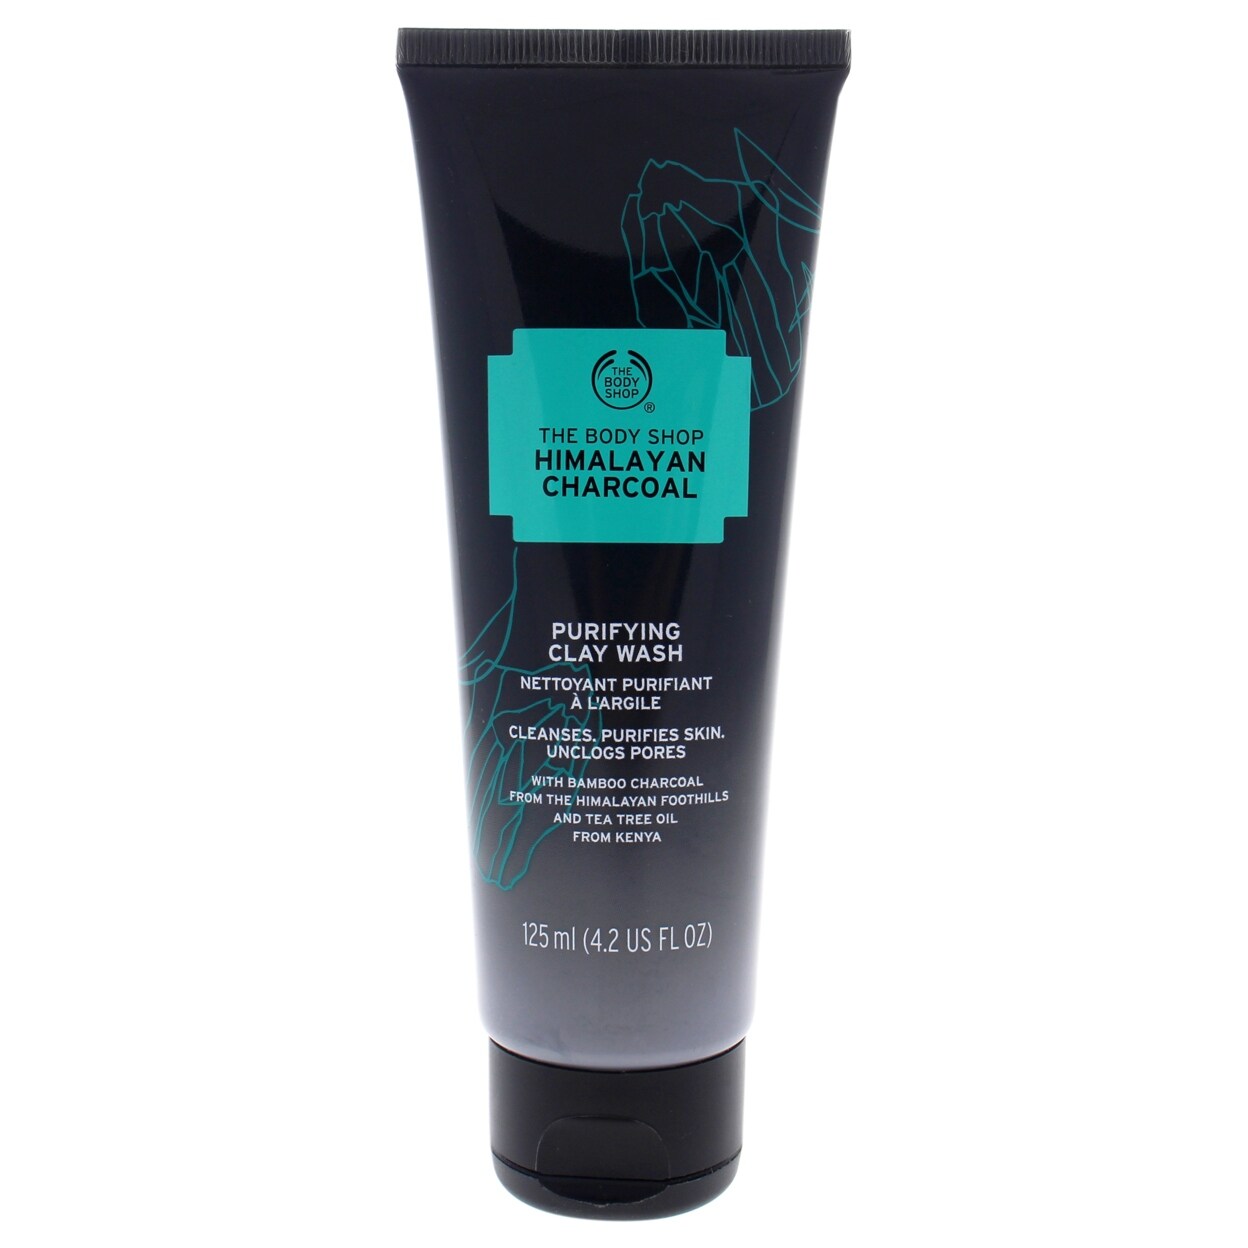 Himalayan Charcoal Purifying Clay Wash By The Body Shop For Women - 4 2 Oz Cleanser